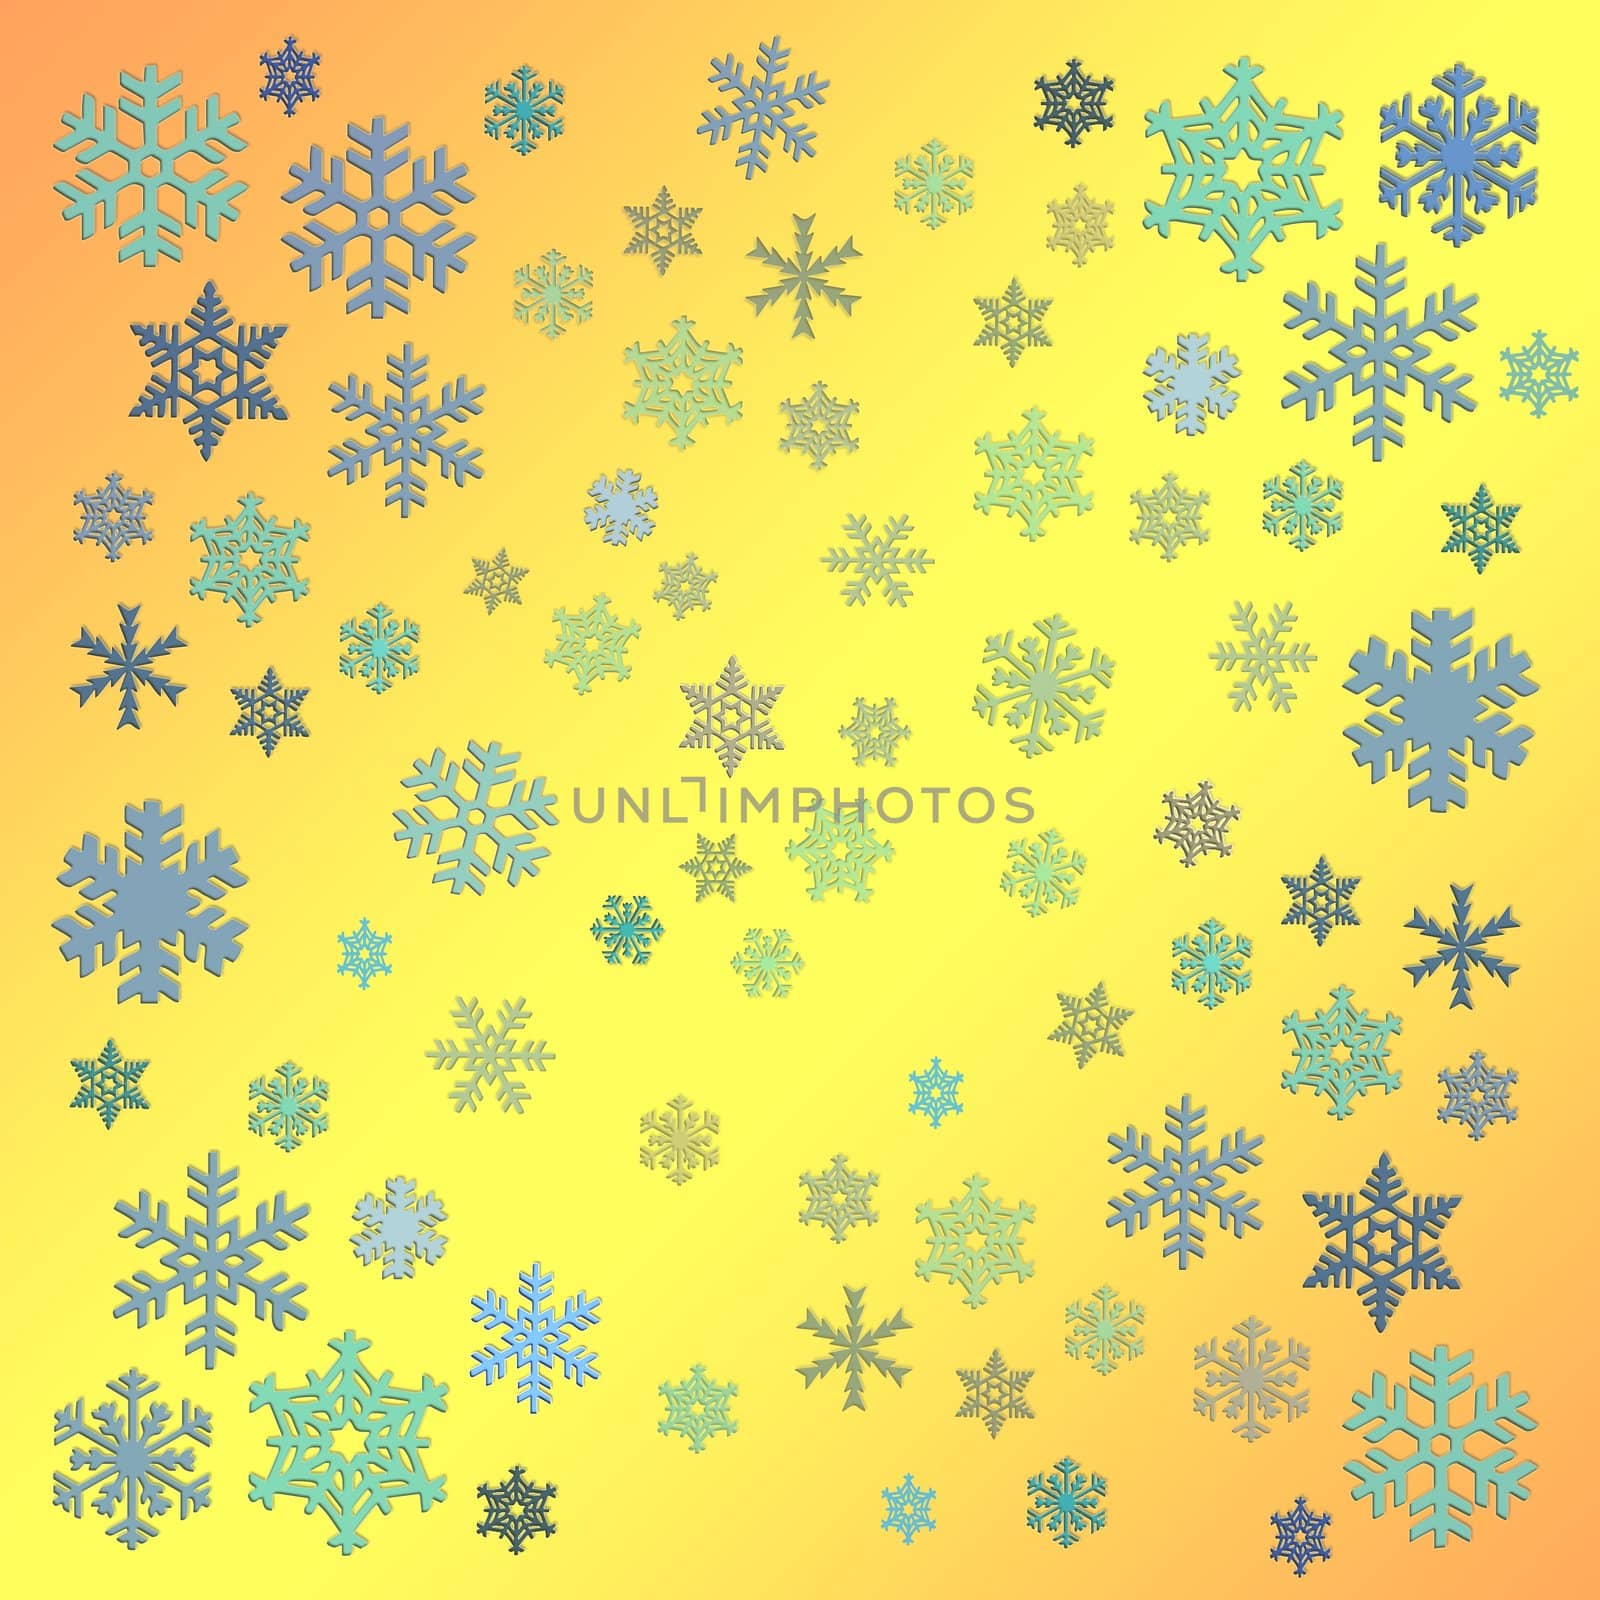 Abstract with white snow flakes against yellow background